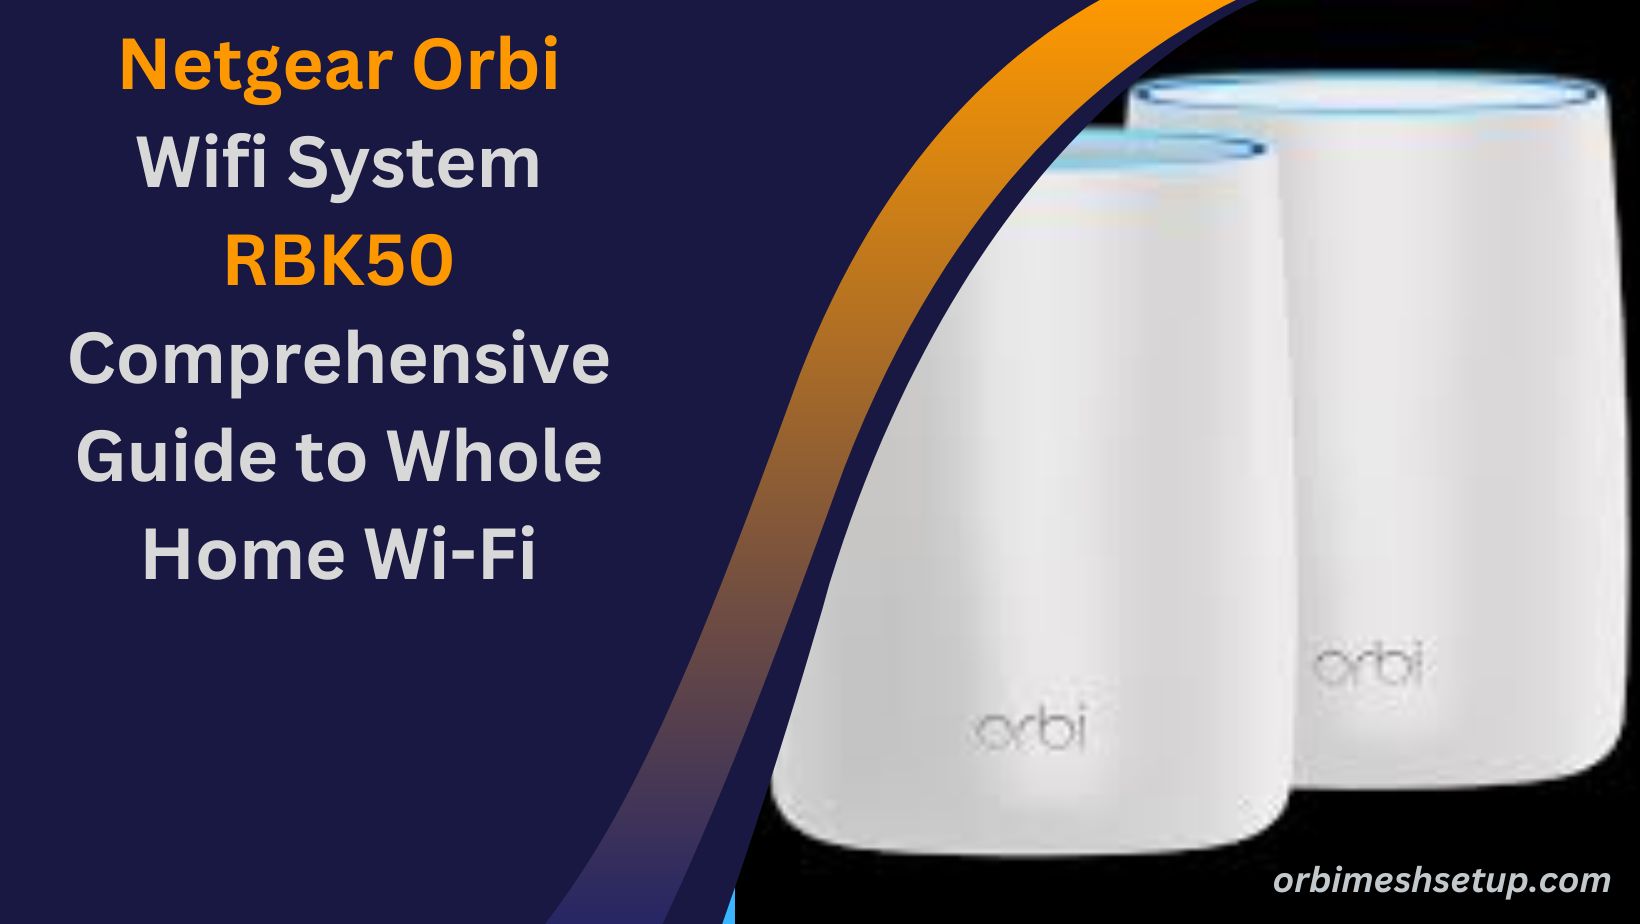 You are currently viewing Netgear Orbi Wifi System RBK50 Comprehensive Guide to Whole Home Wi-Fi